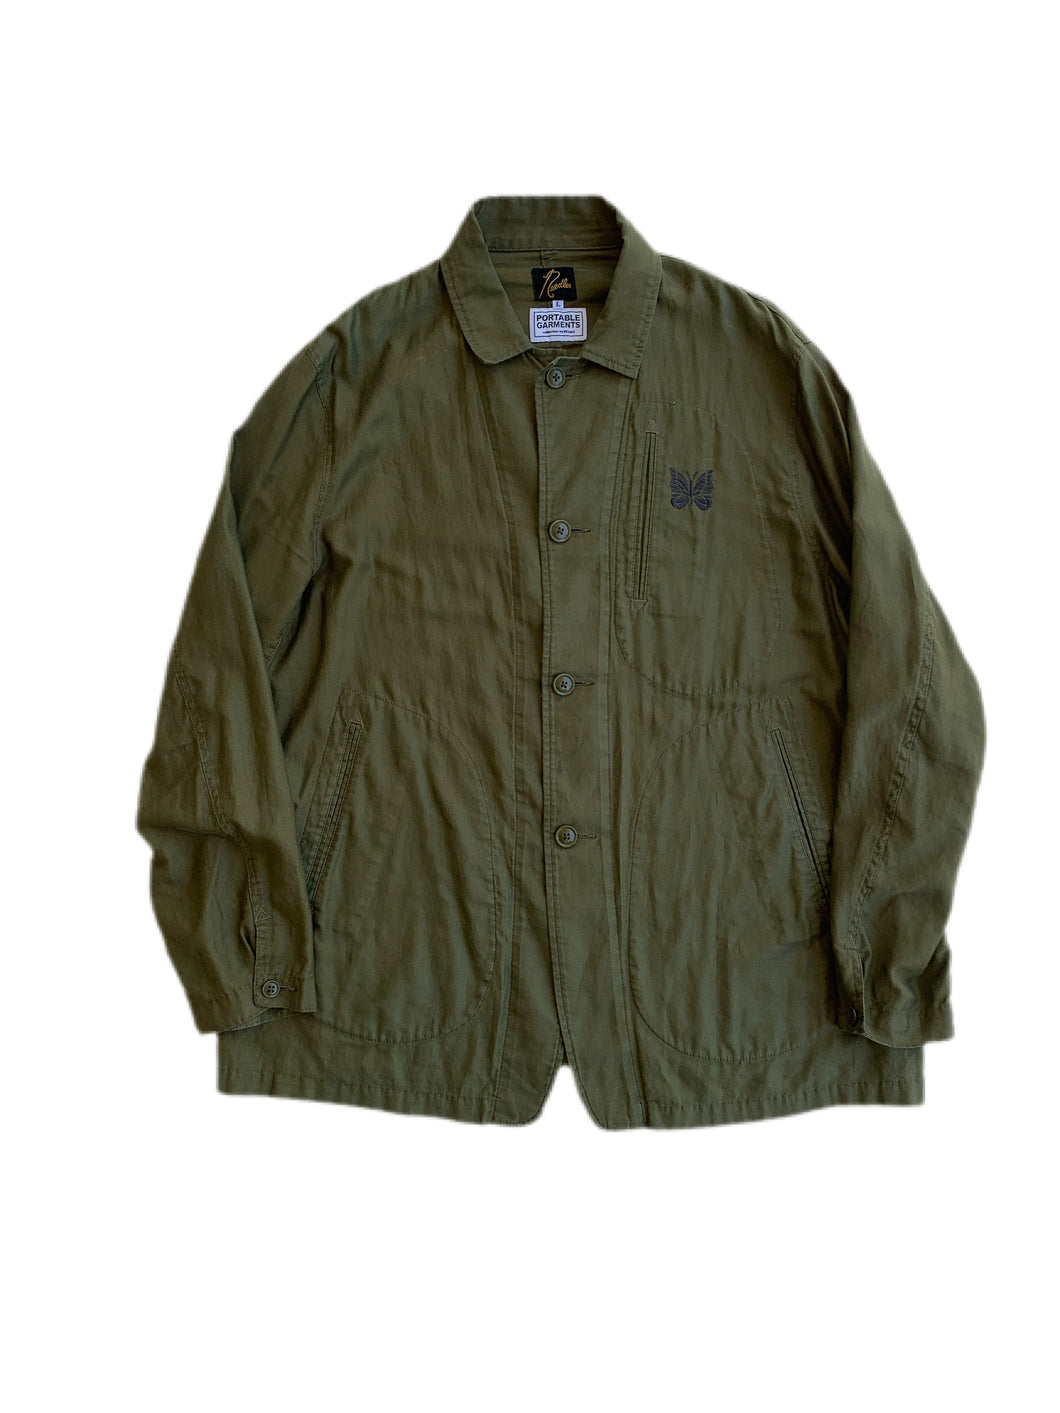 Needles Coverall Button Up